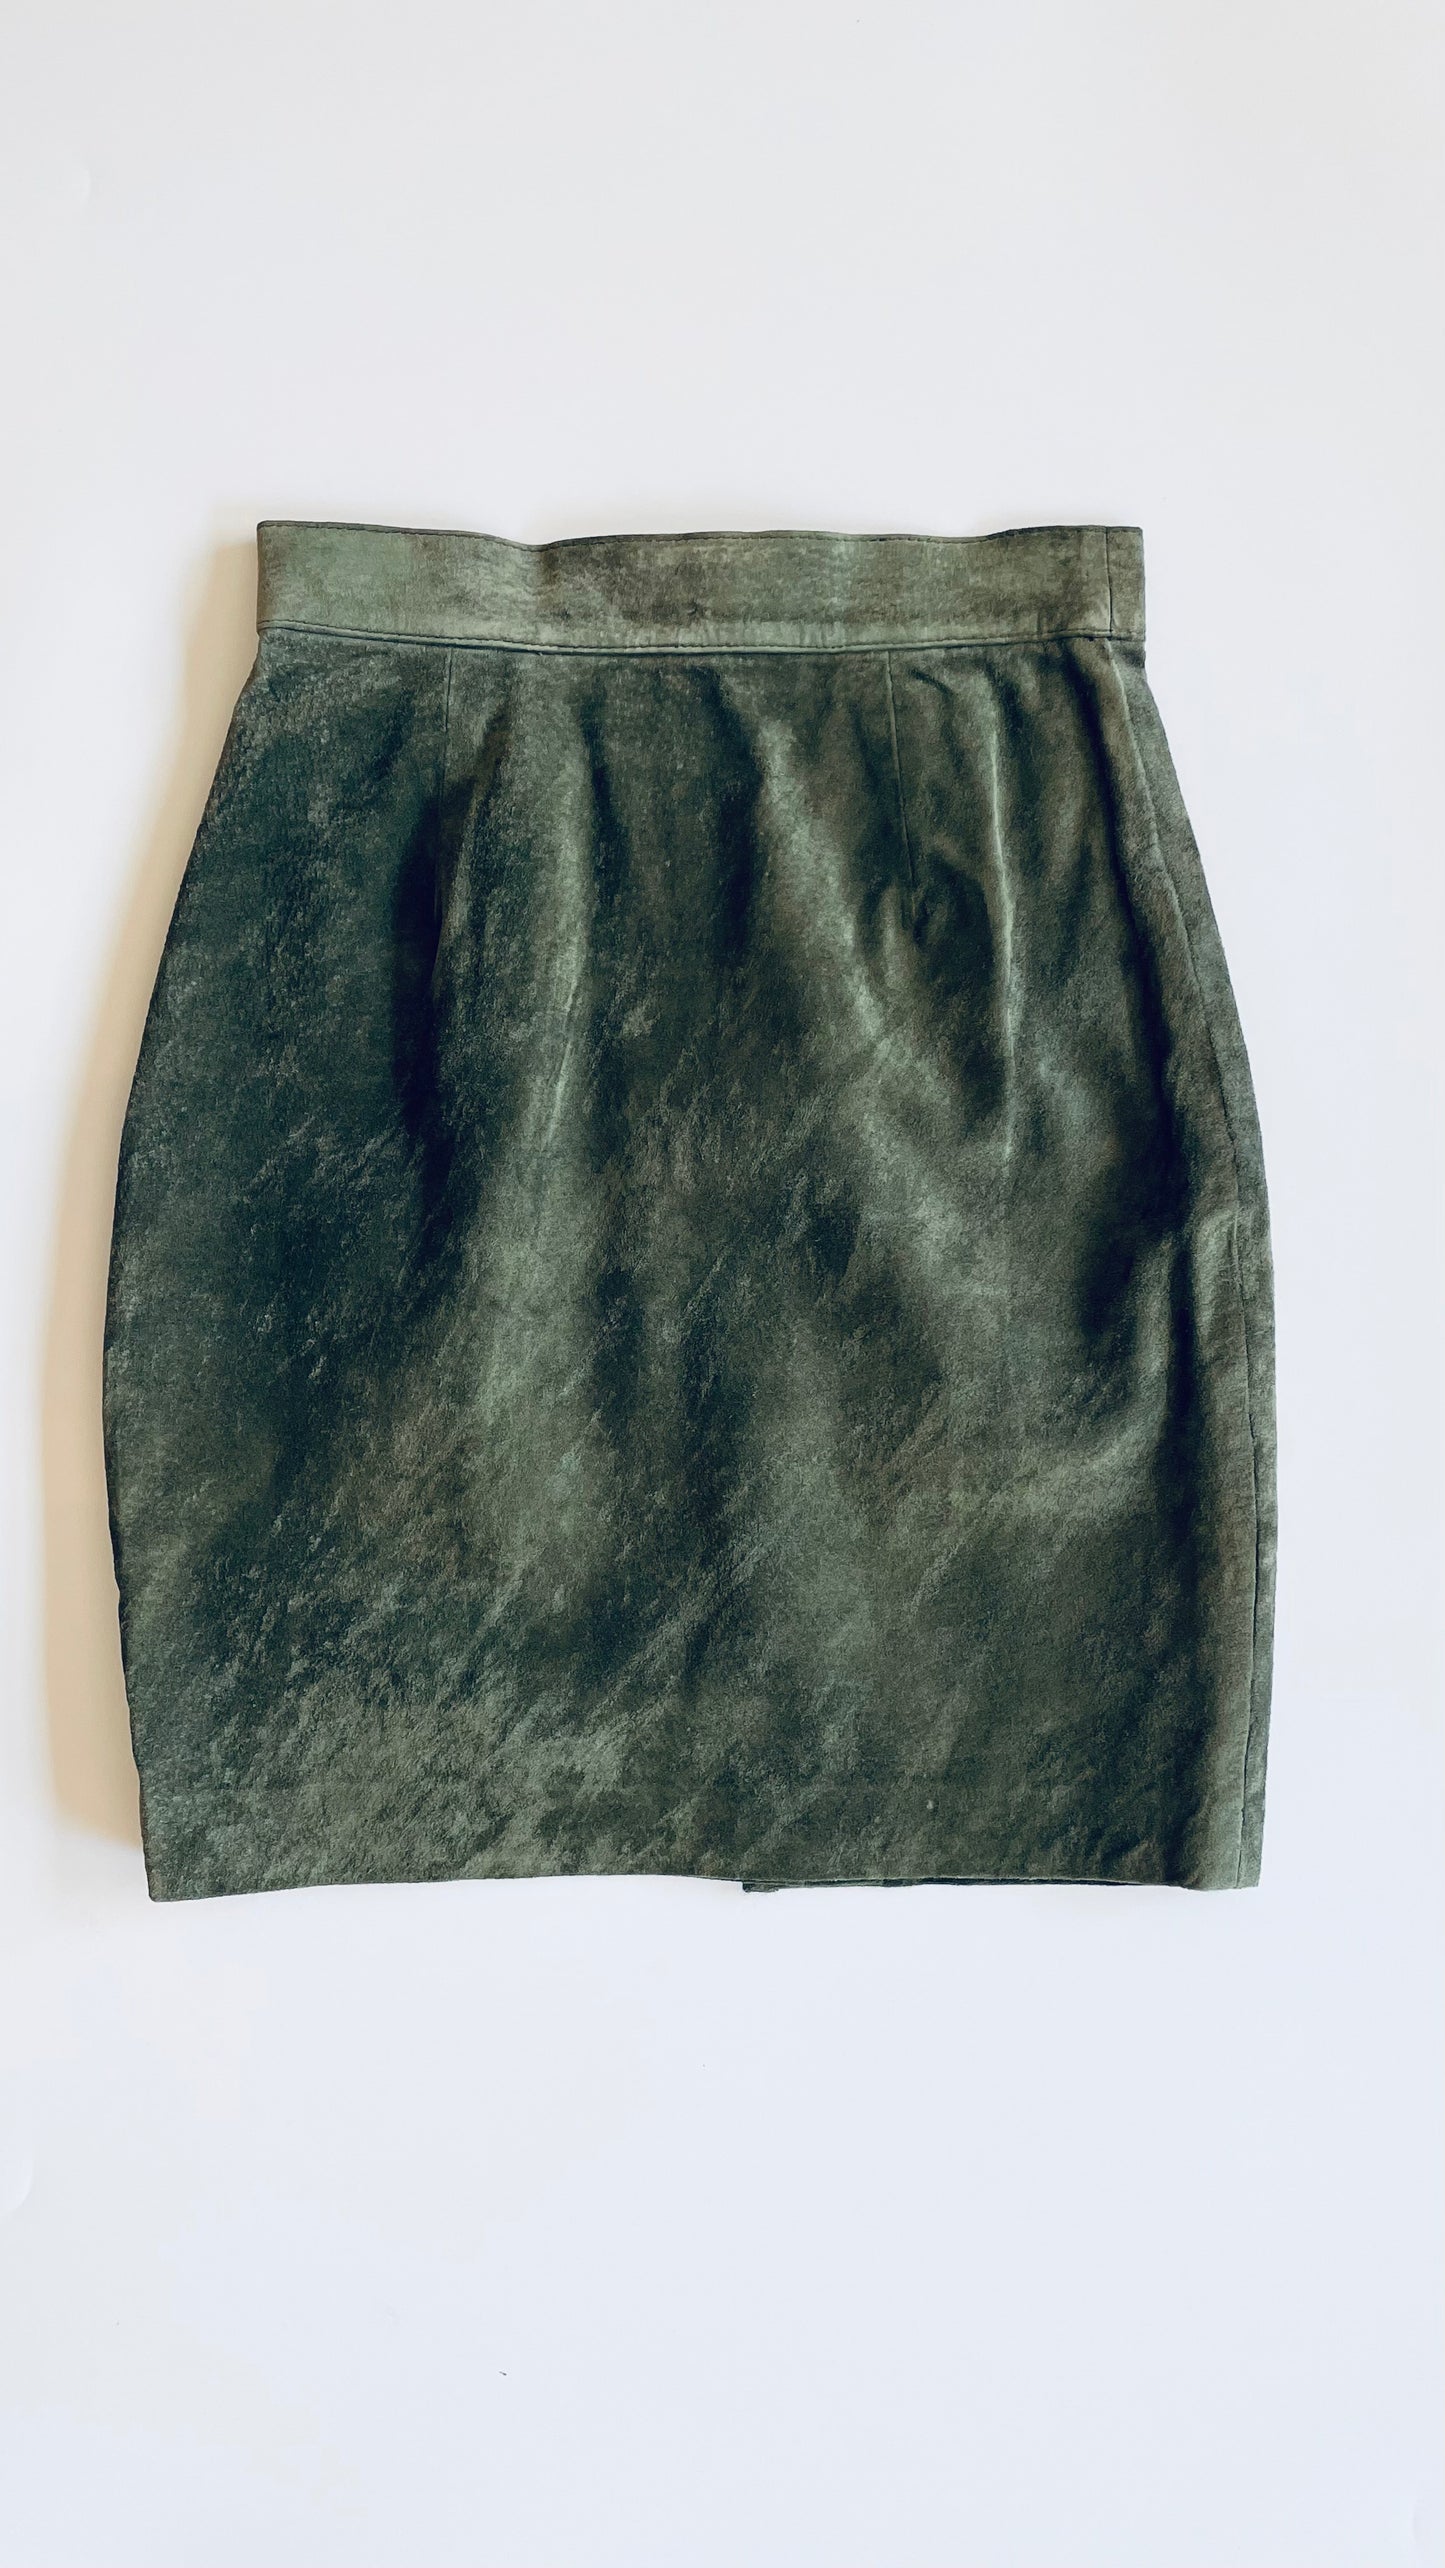 Vintage 90s United Colors of Benetton green suede mini skirt - Size XS